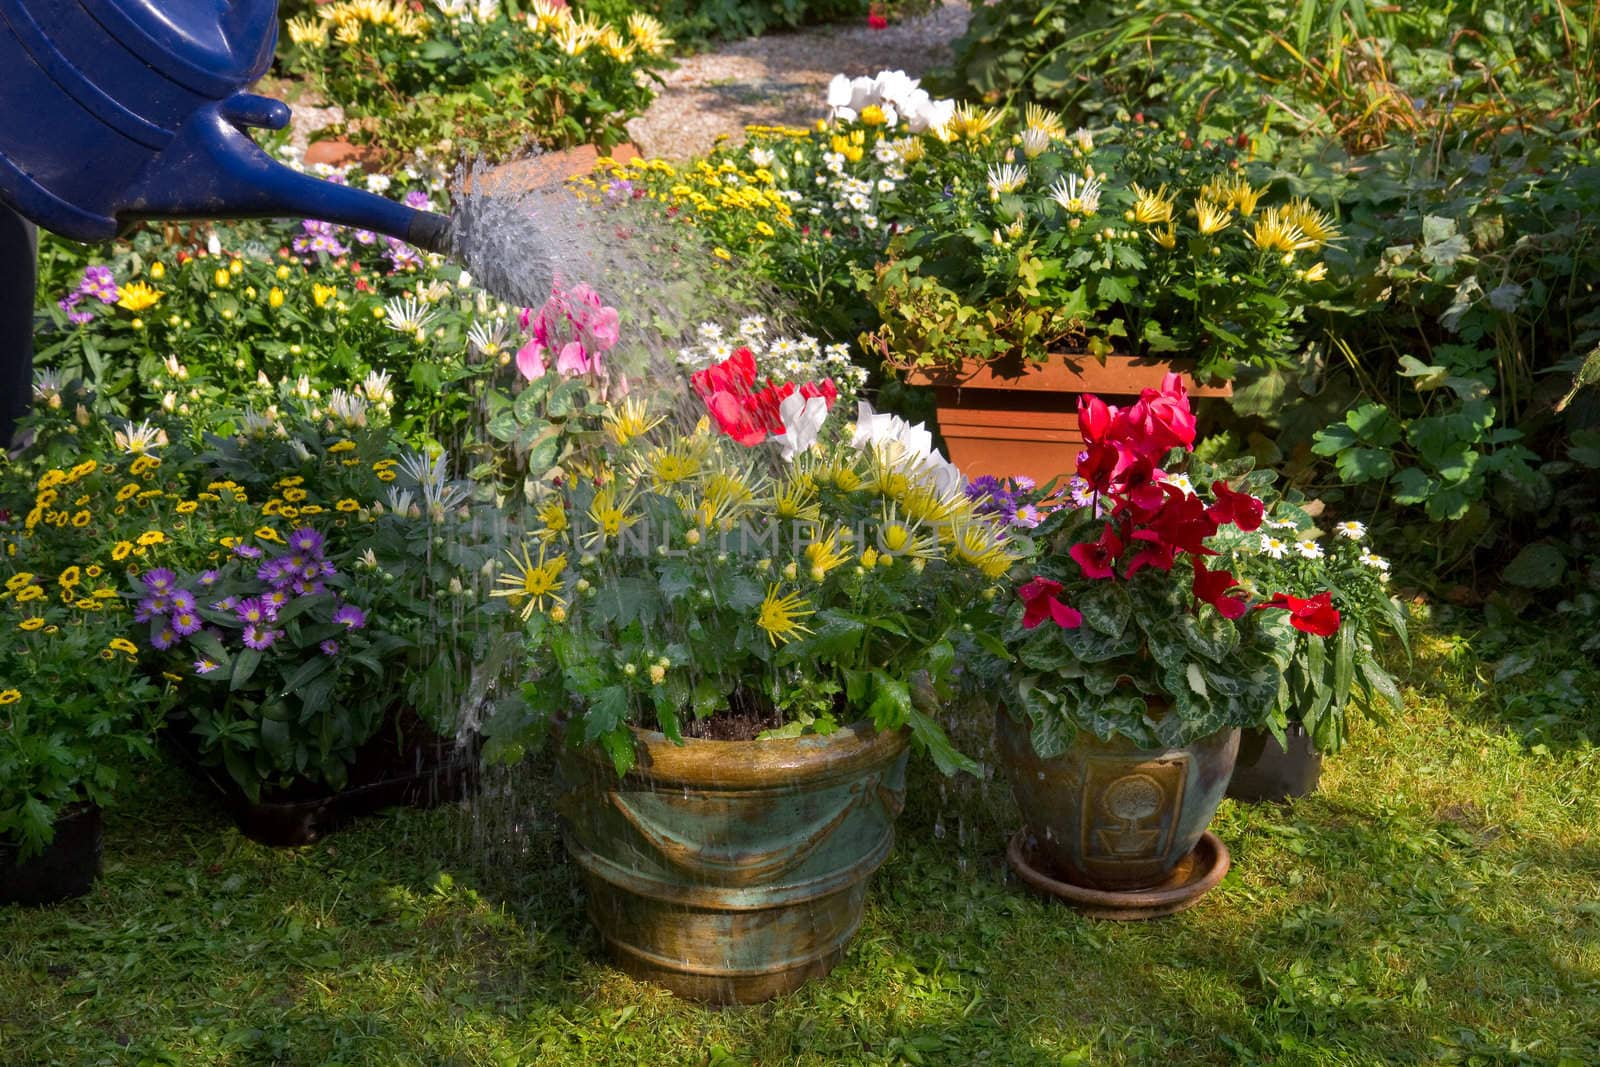 Garden with autumn flowers in September - Watering flowerpots with new plants